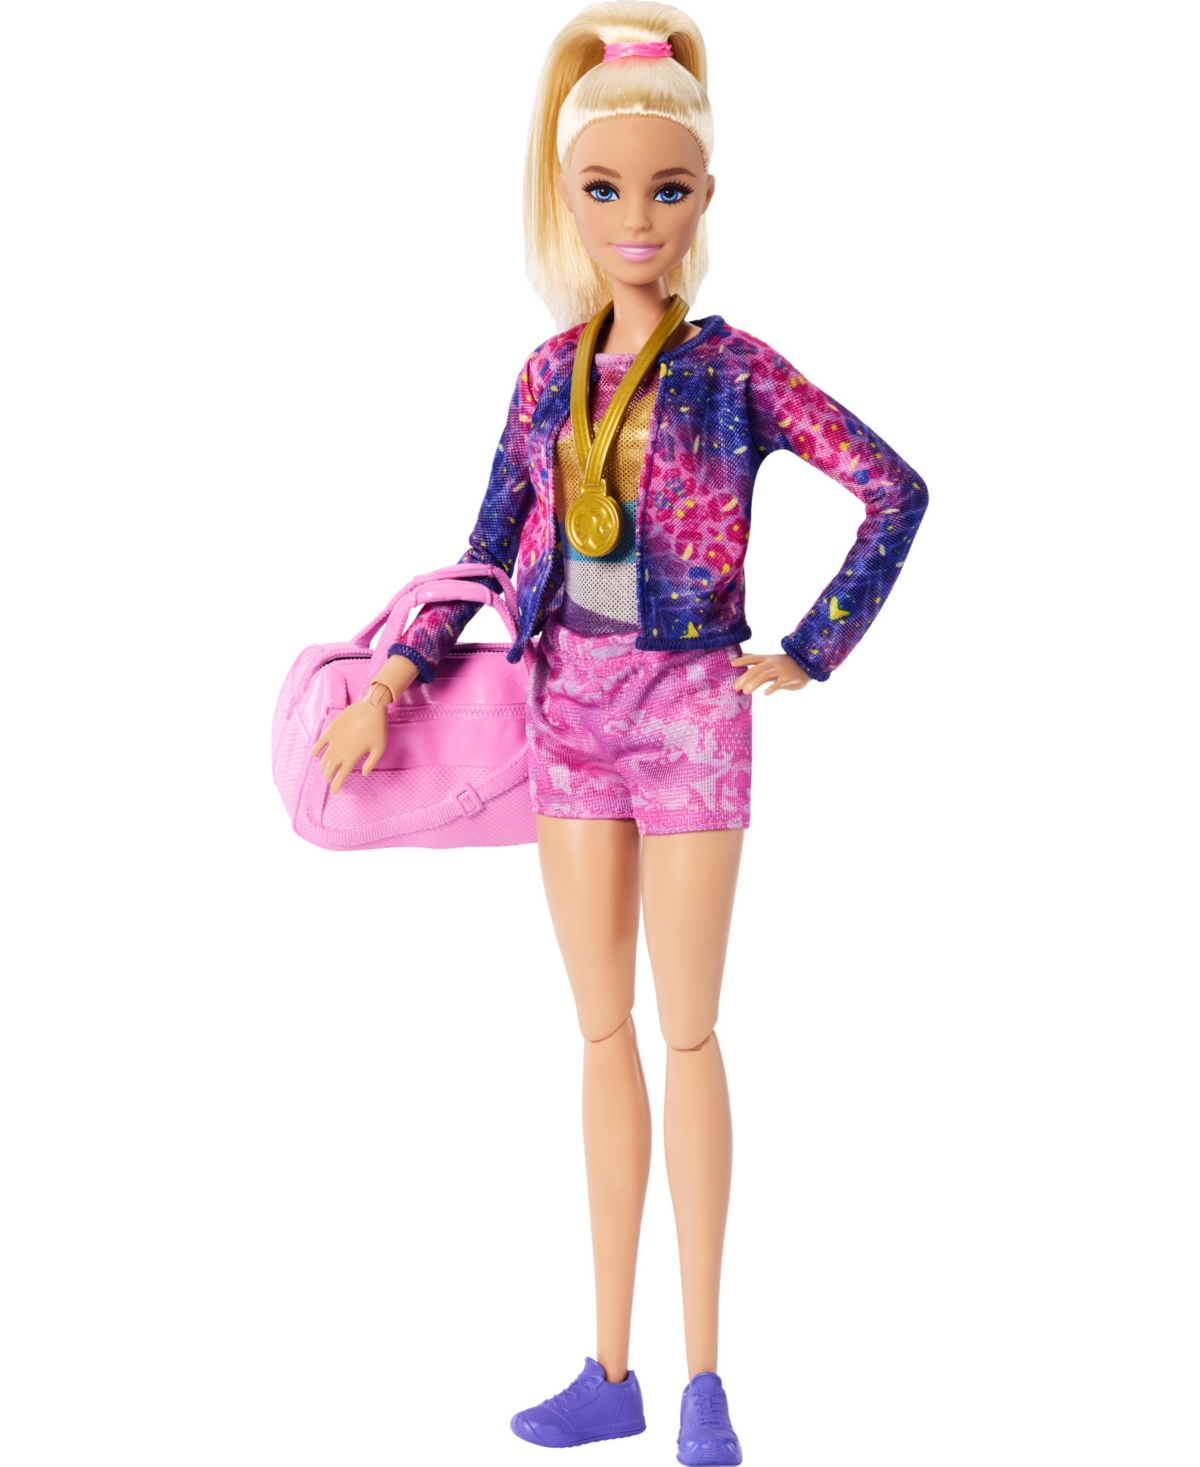 Shop Barbie Gymnastics Play Set With Blonde Fashion Doll, Balance Beam, 10 Plus Accessories And Flip Feature In Multi